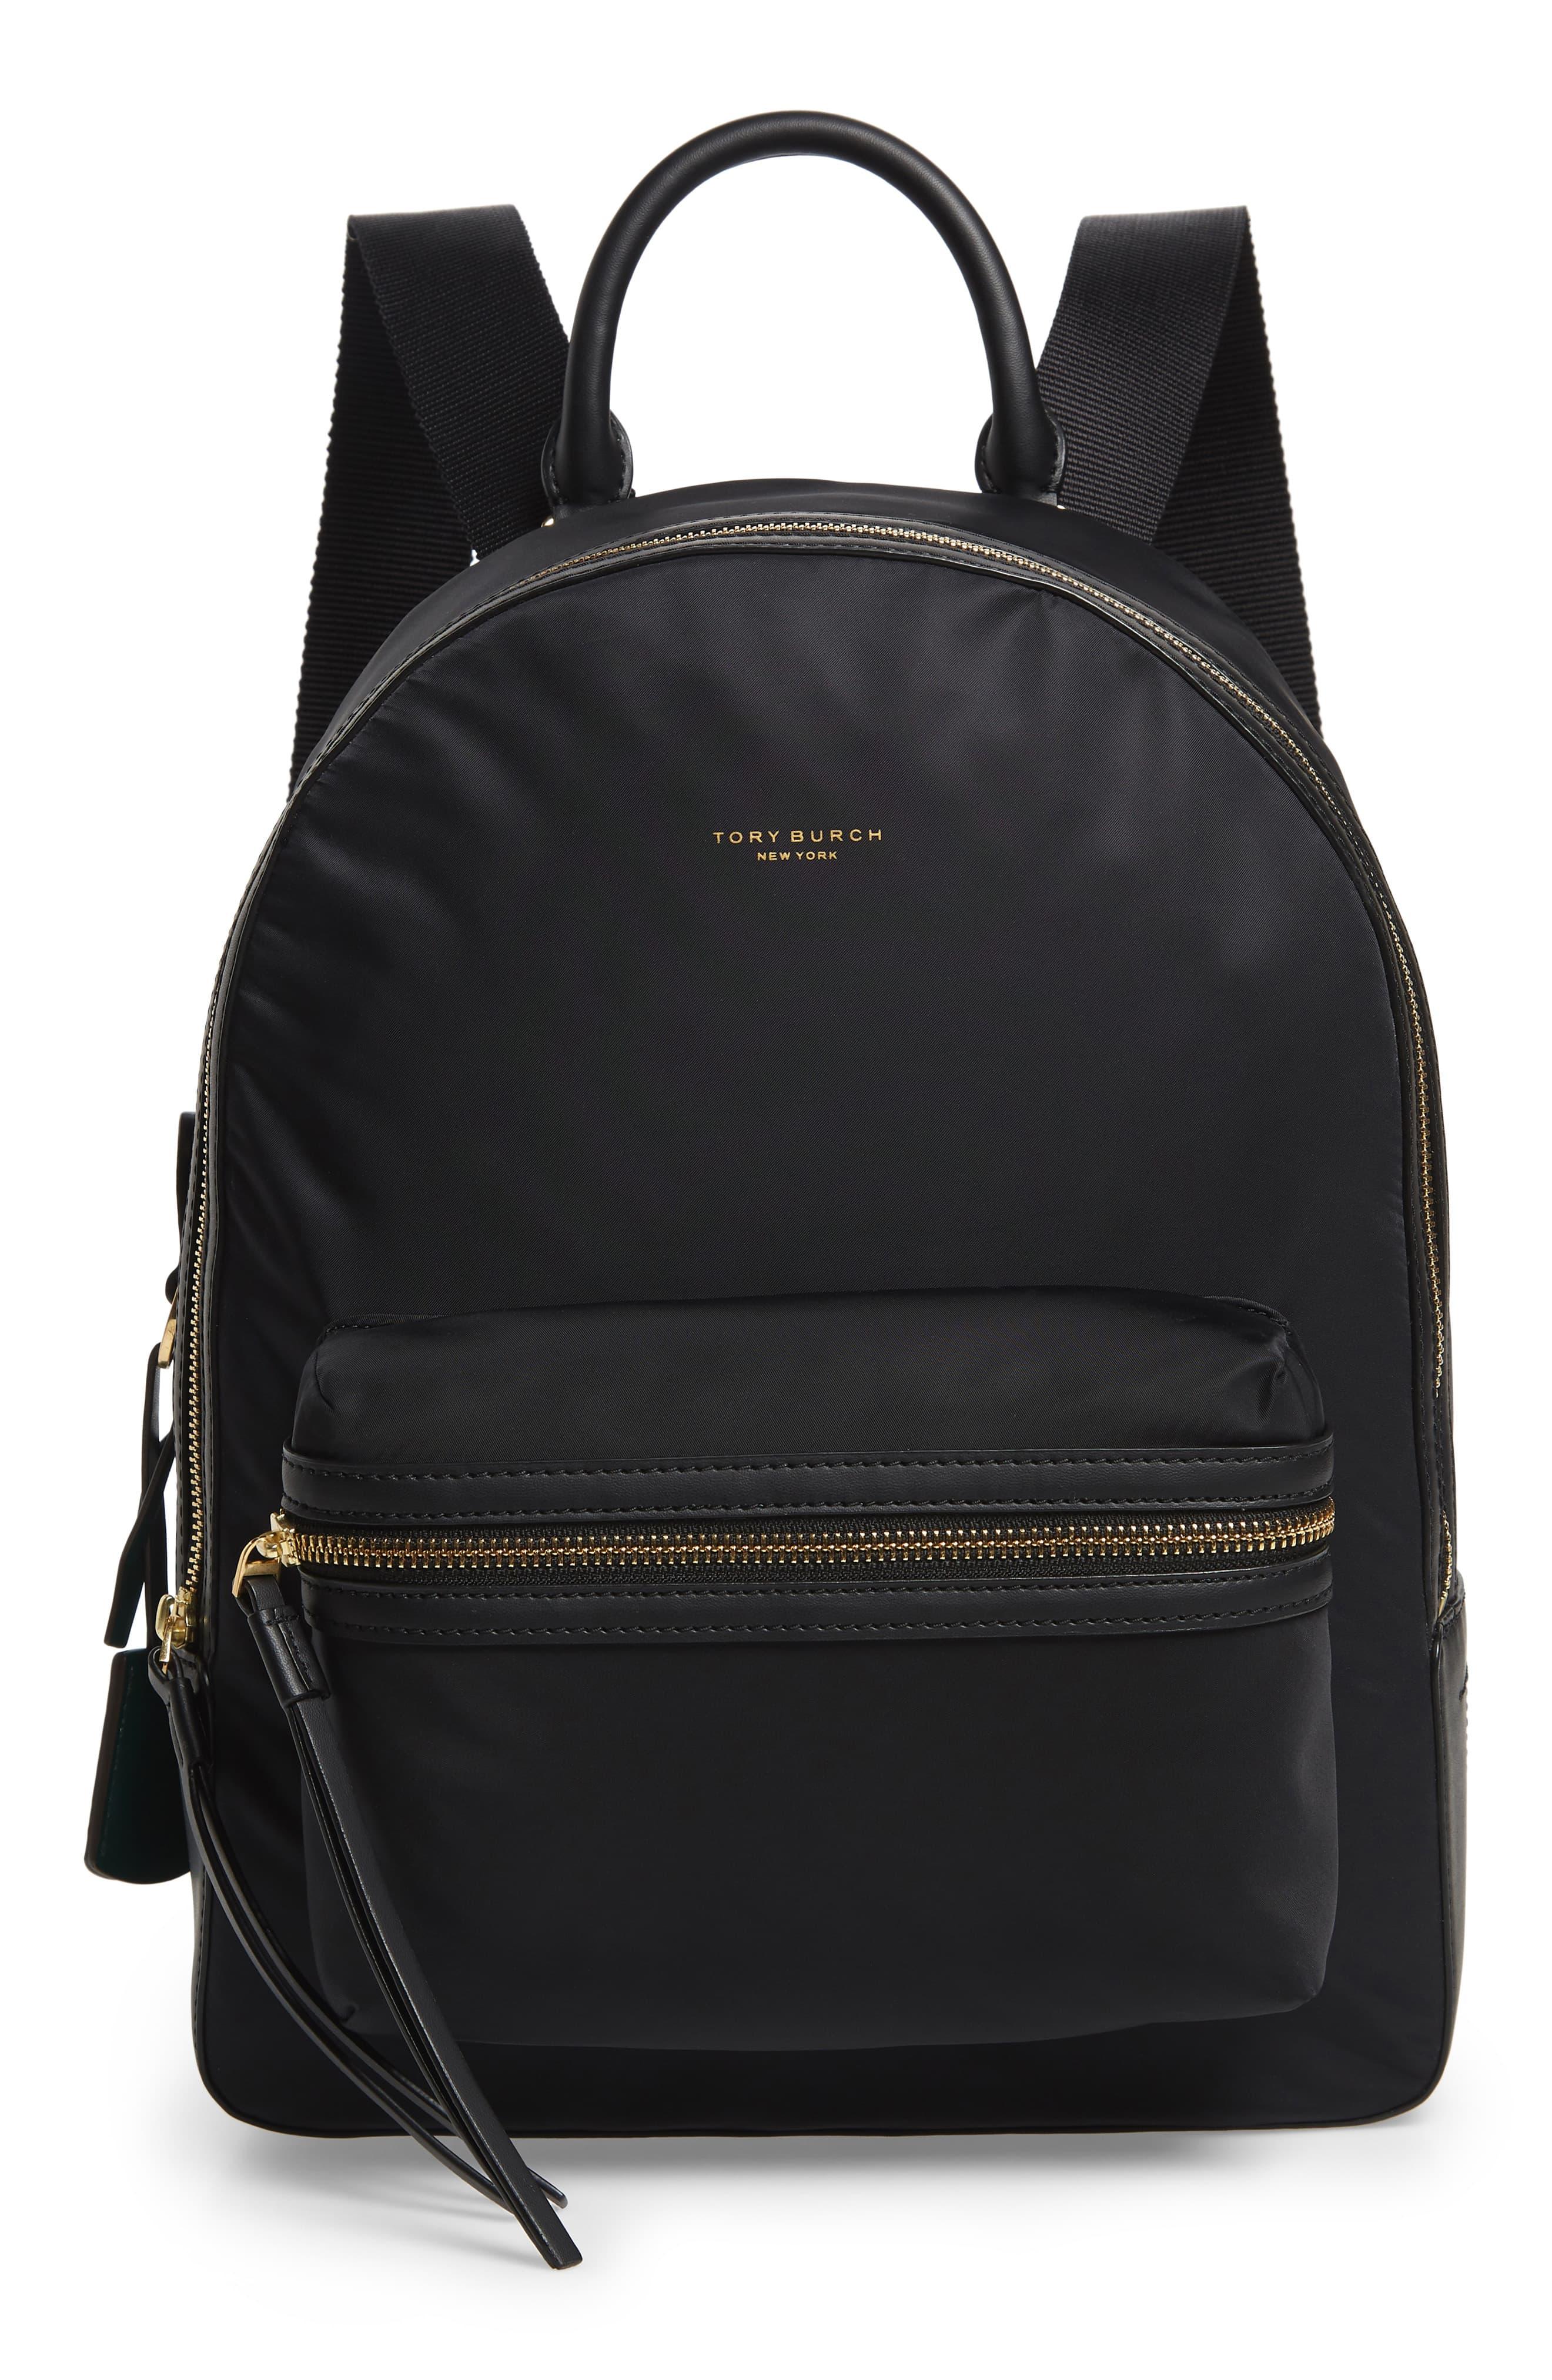 Tory Burch Perry Nylon Backpack in Black | Lyst